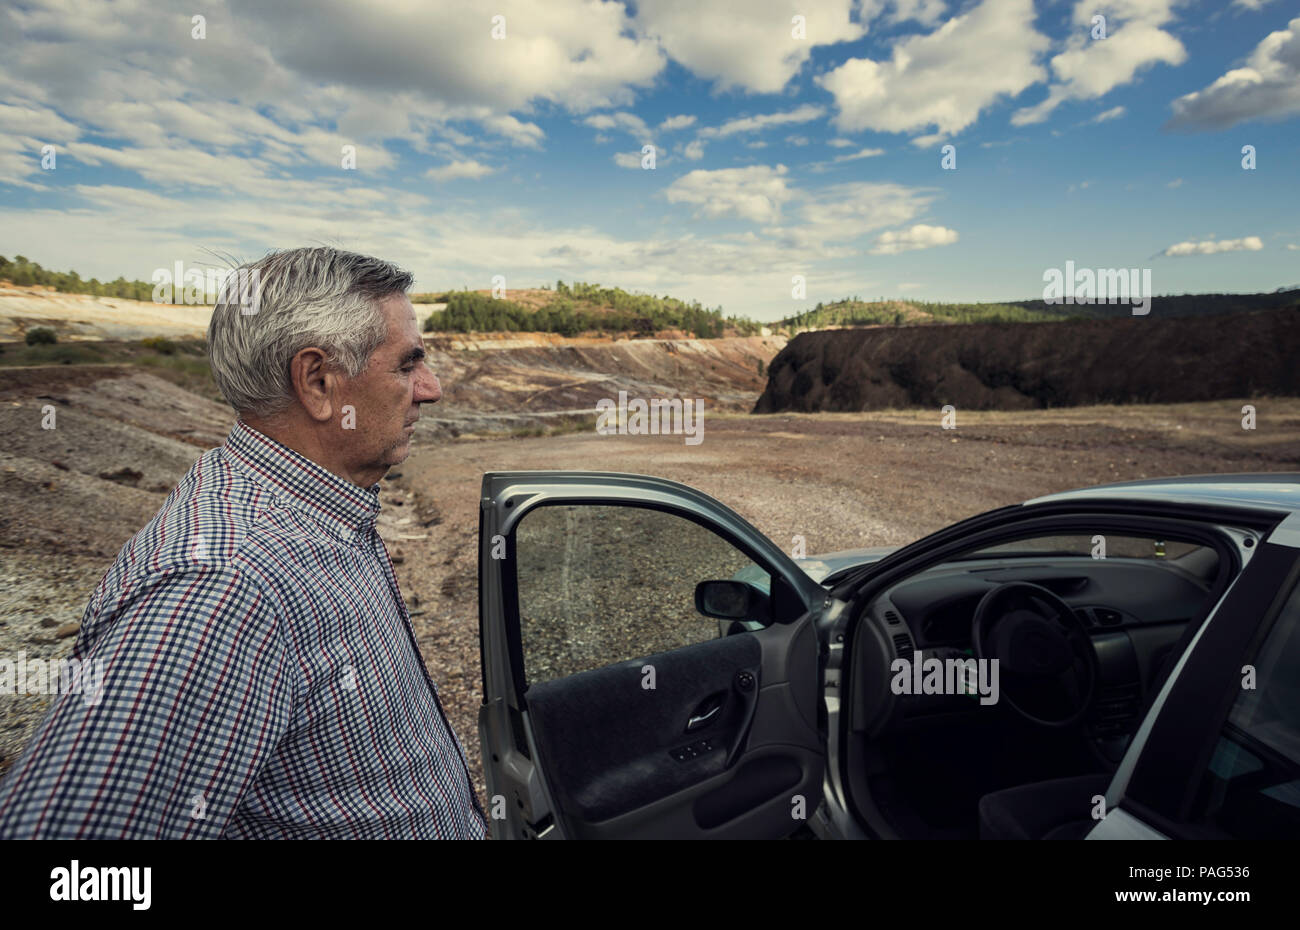 Open car door with elderly man standing looking at the dashboard with zaranda mines in the background, Spain Stock Photo